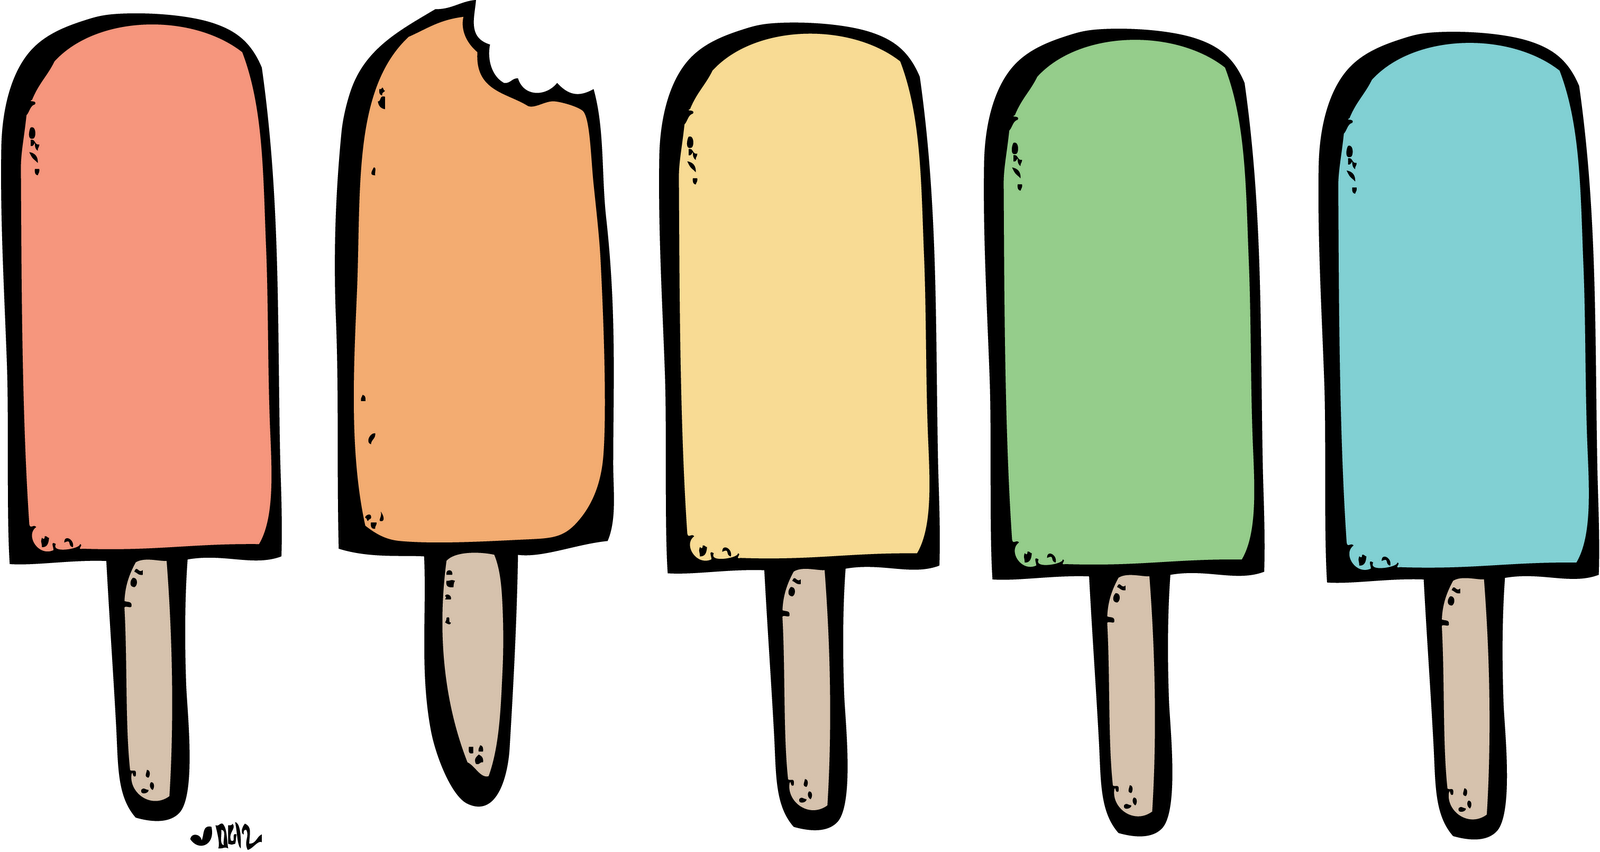 Clipart rocket lolly. Popsicle image high five